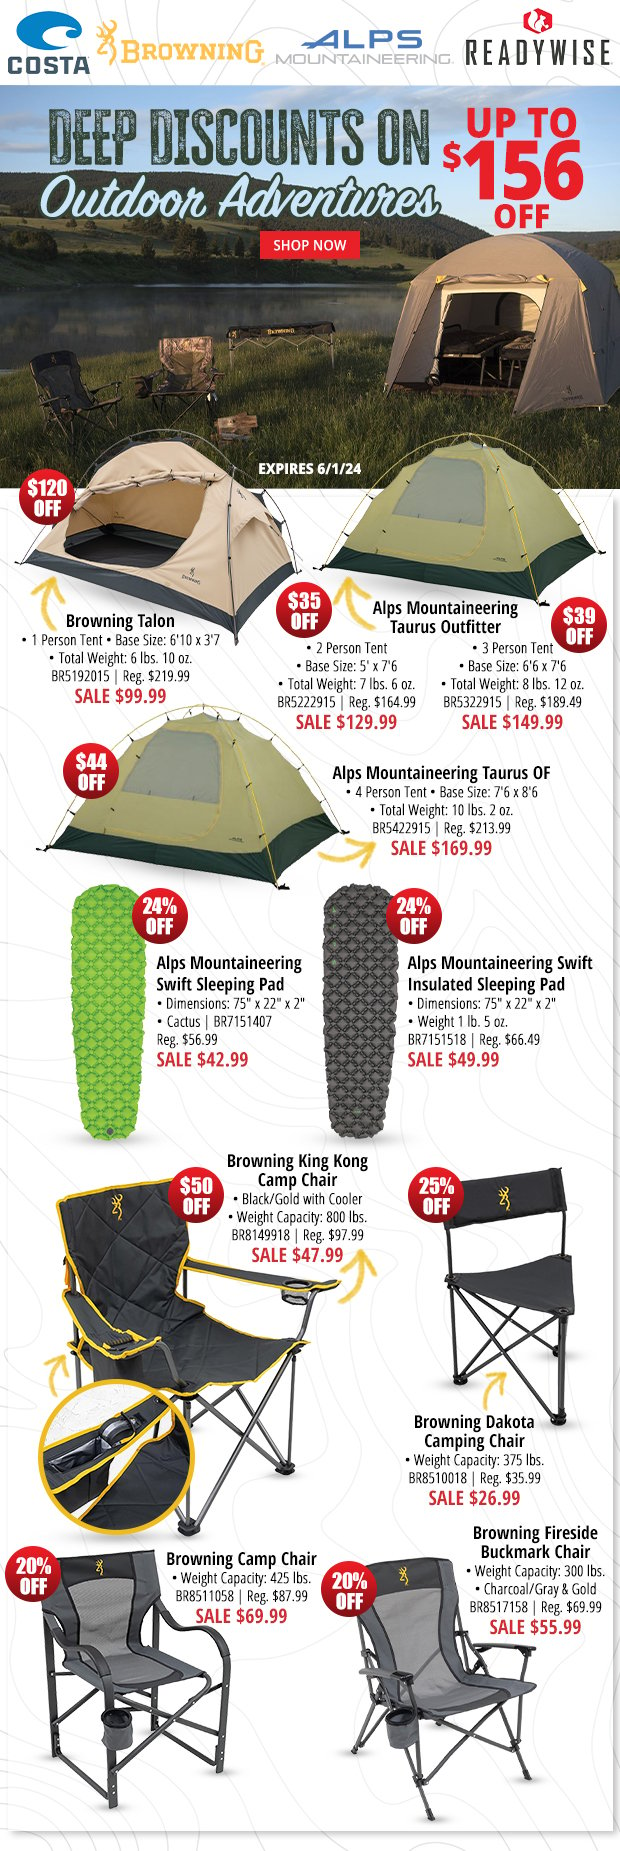 Up to $156 Off Outdoor Adventures with Deep Discounts!